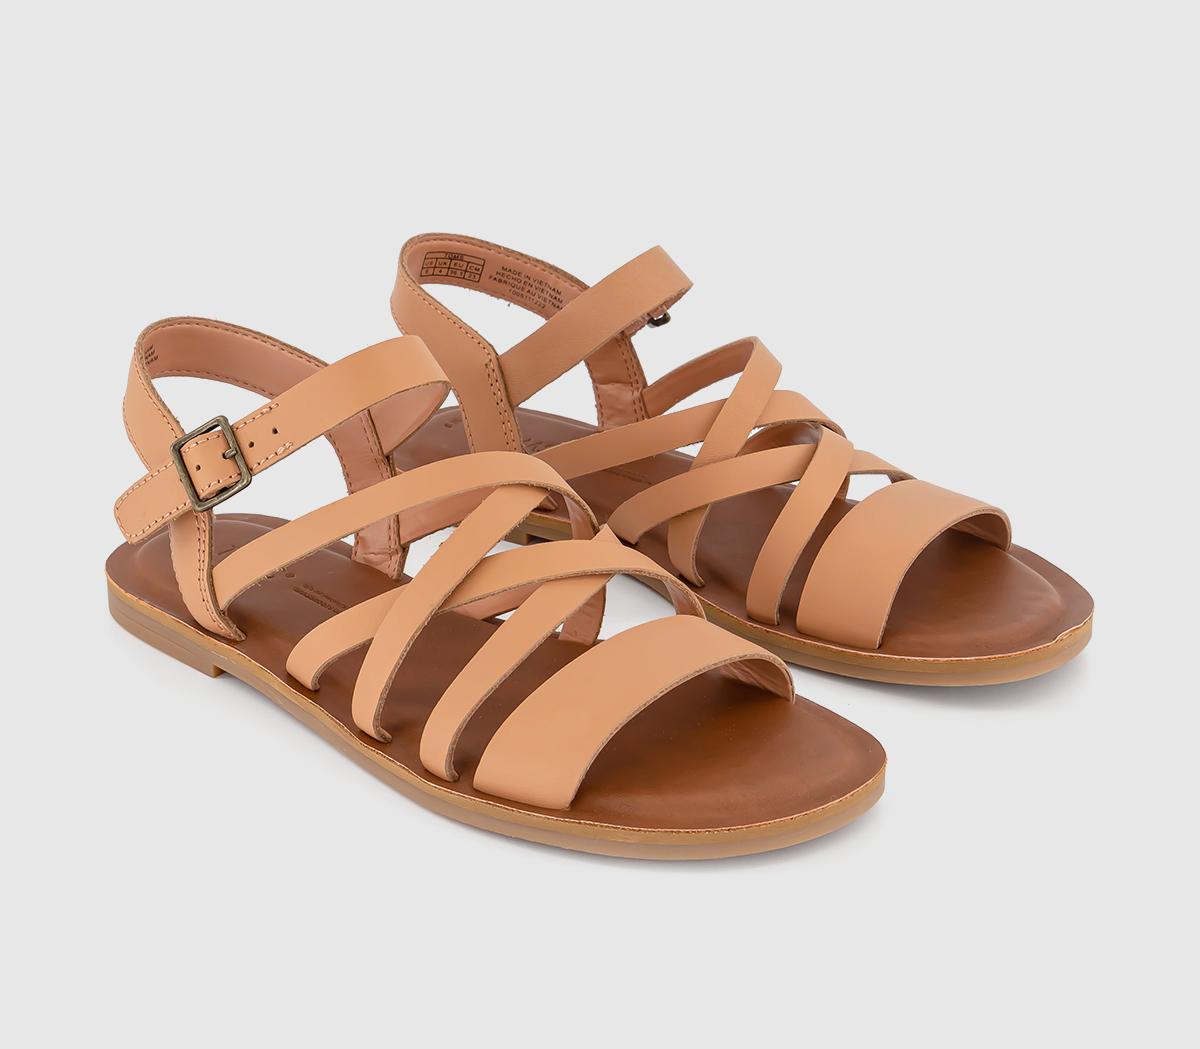 TOMS Womens Sephina Sandals Sandy Beige Leather, 3